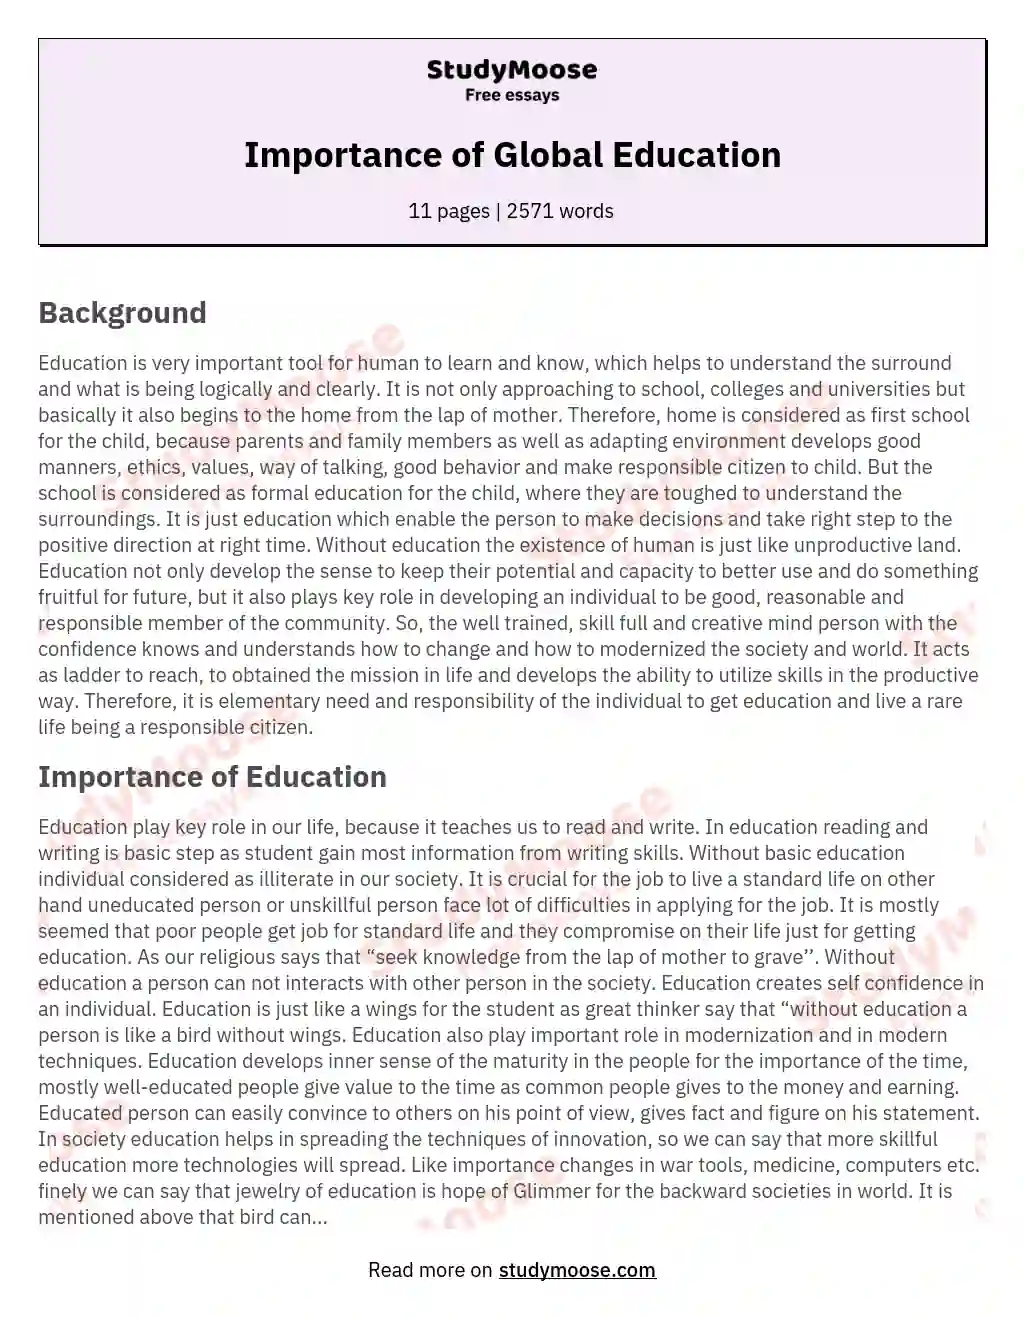 Importance of Global Education essay